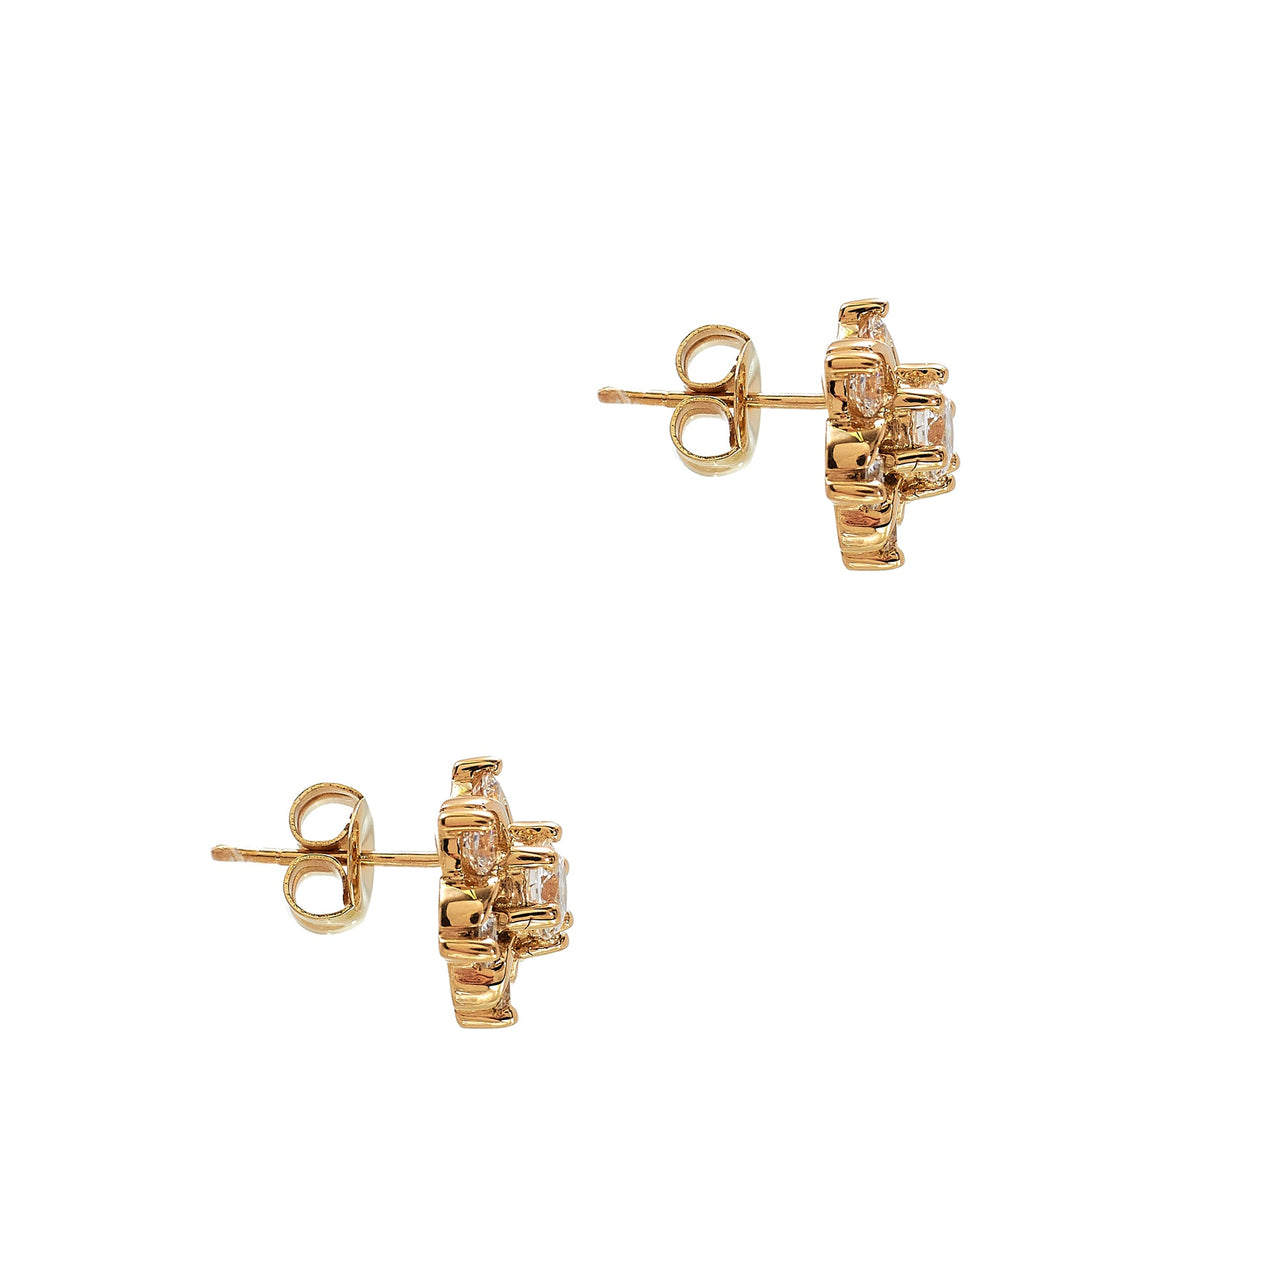 Pre-Owned 18ct Gold Flower Cluster CZ Stud Earrings